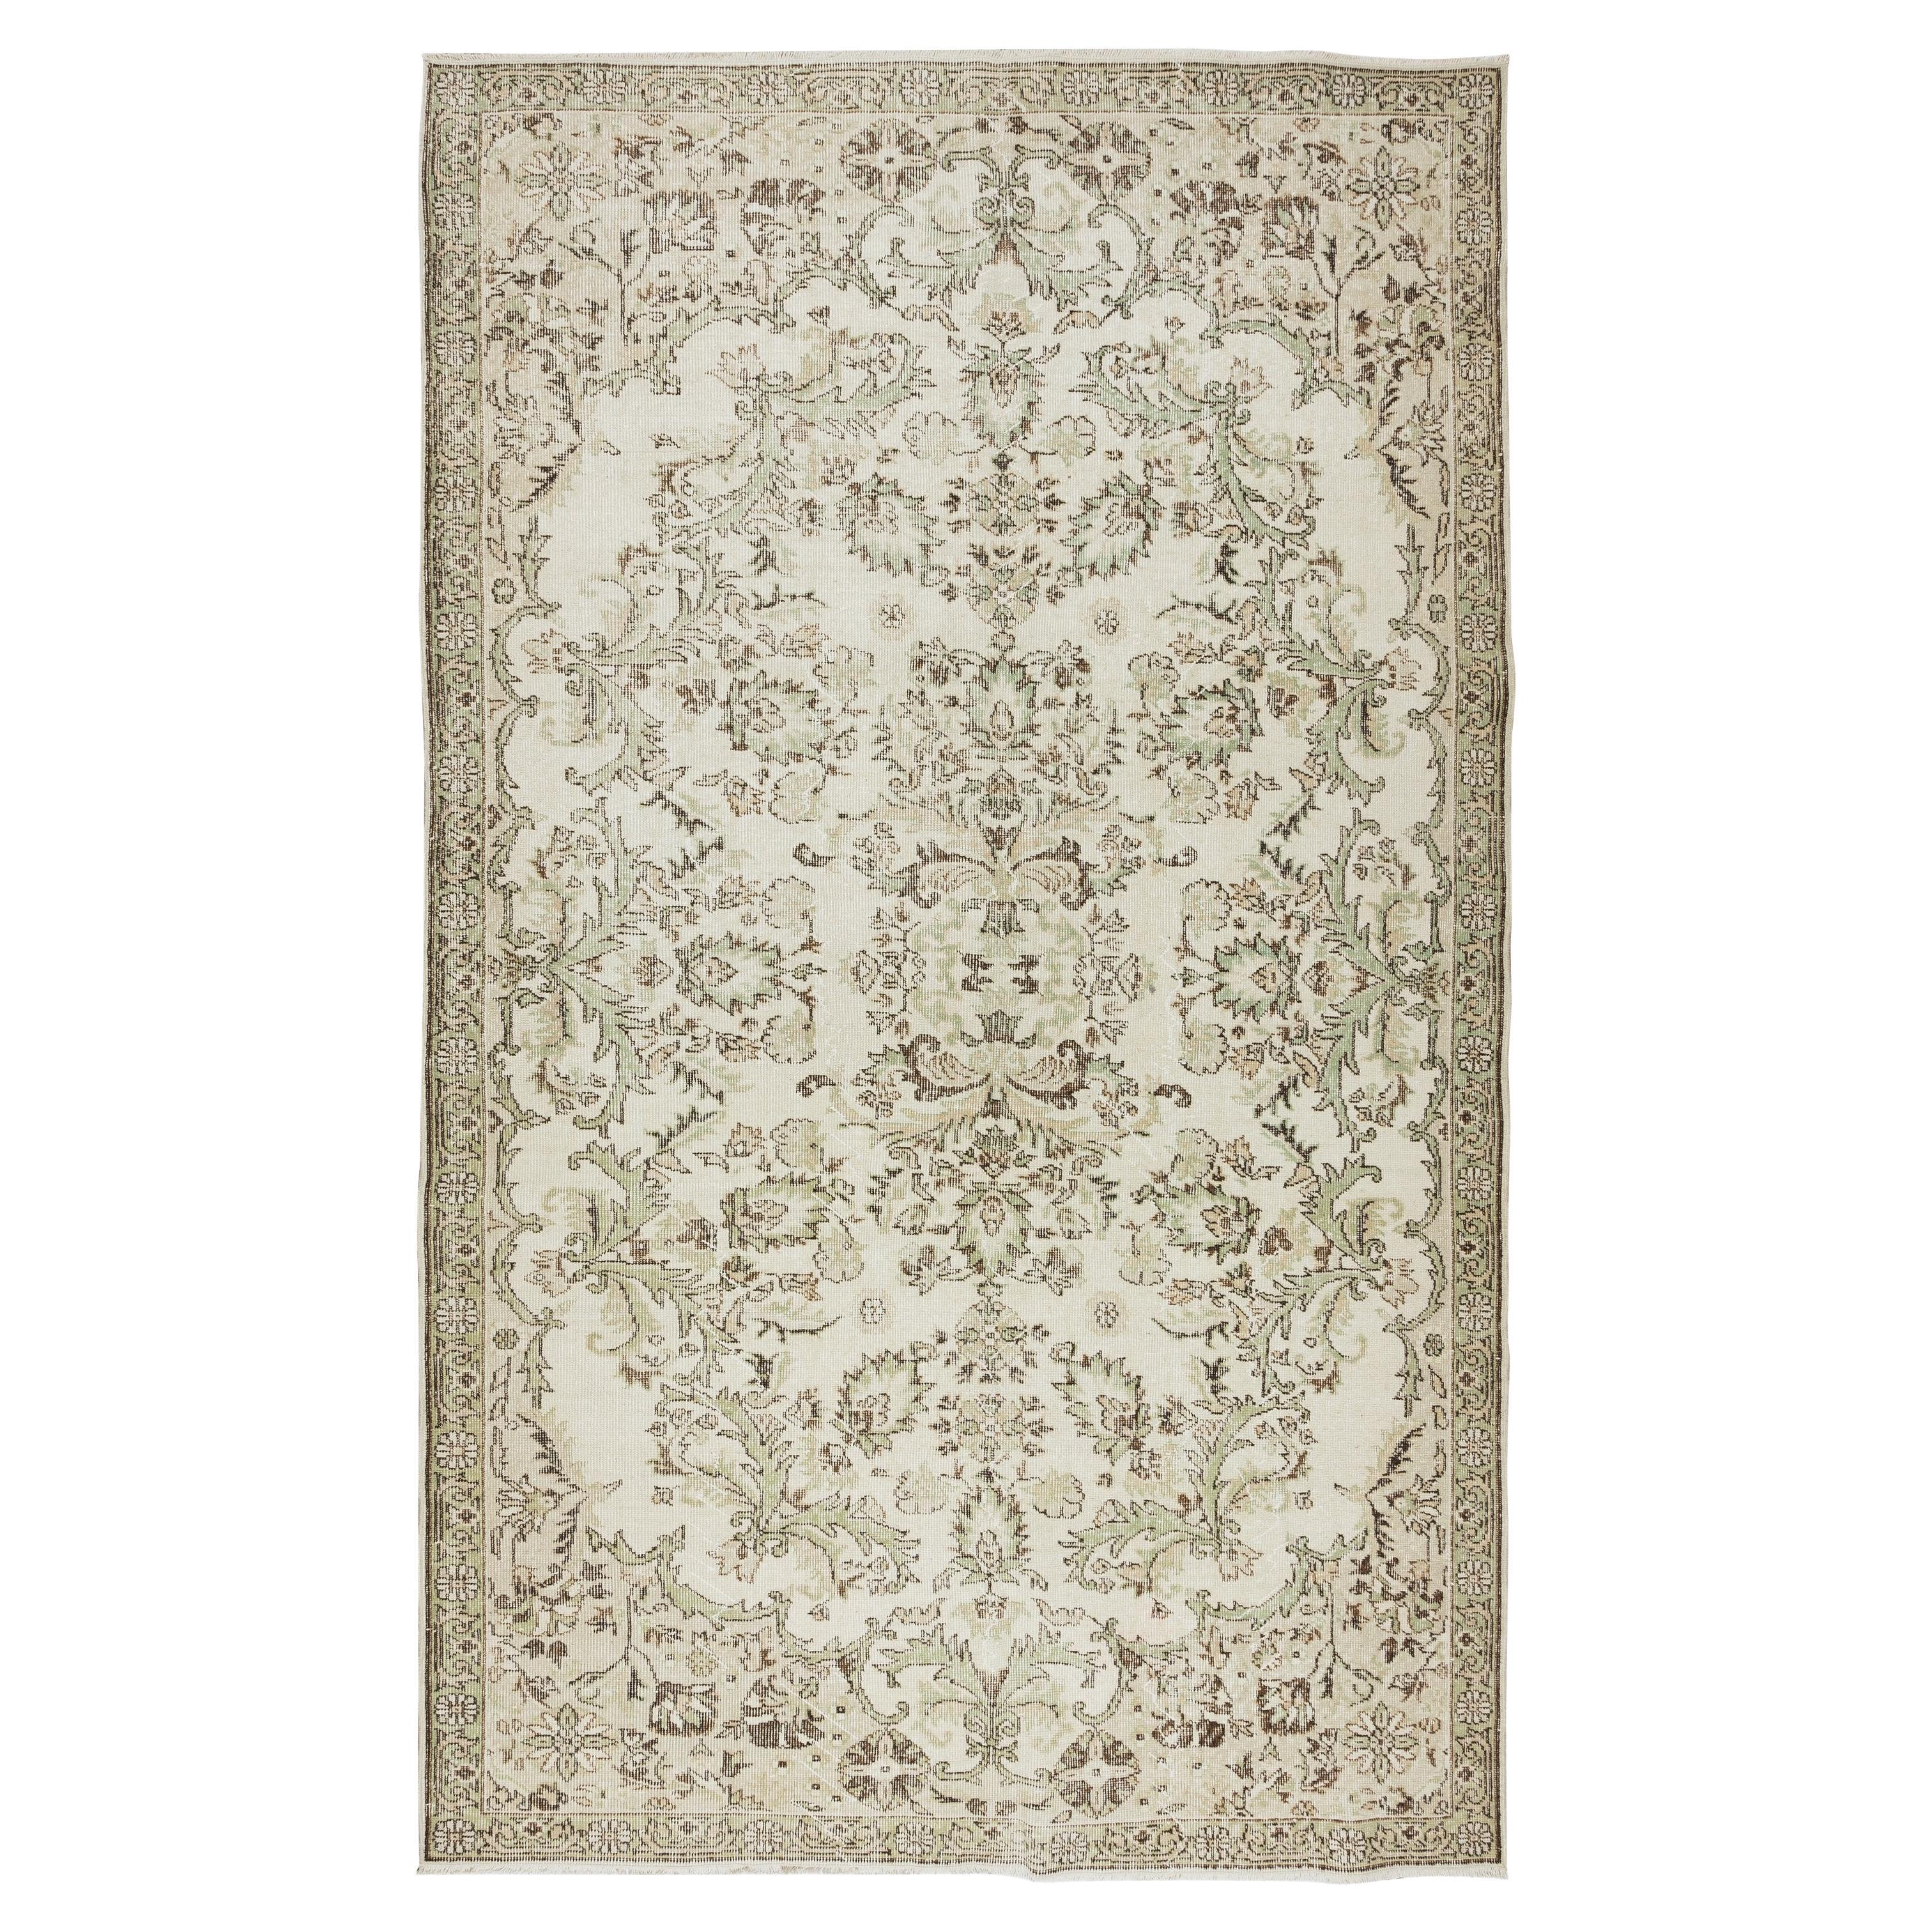 6.3x10.3 Ft Vintage Handmade Anatolian Oushak Wool Rug with Floral Garden Design For Sale